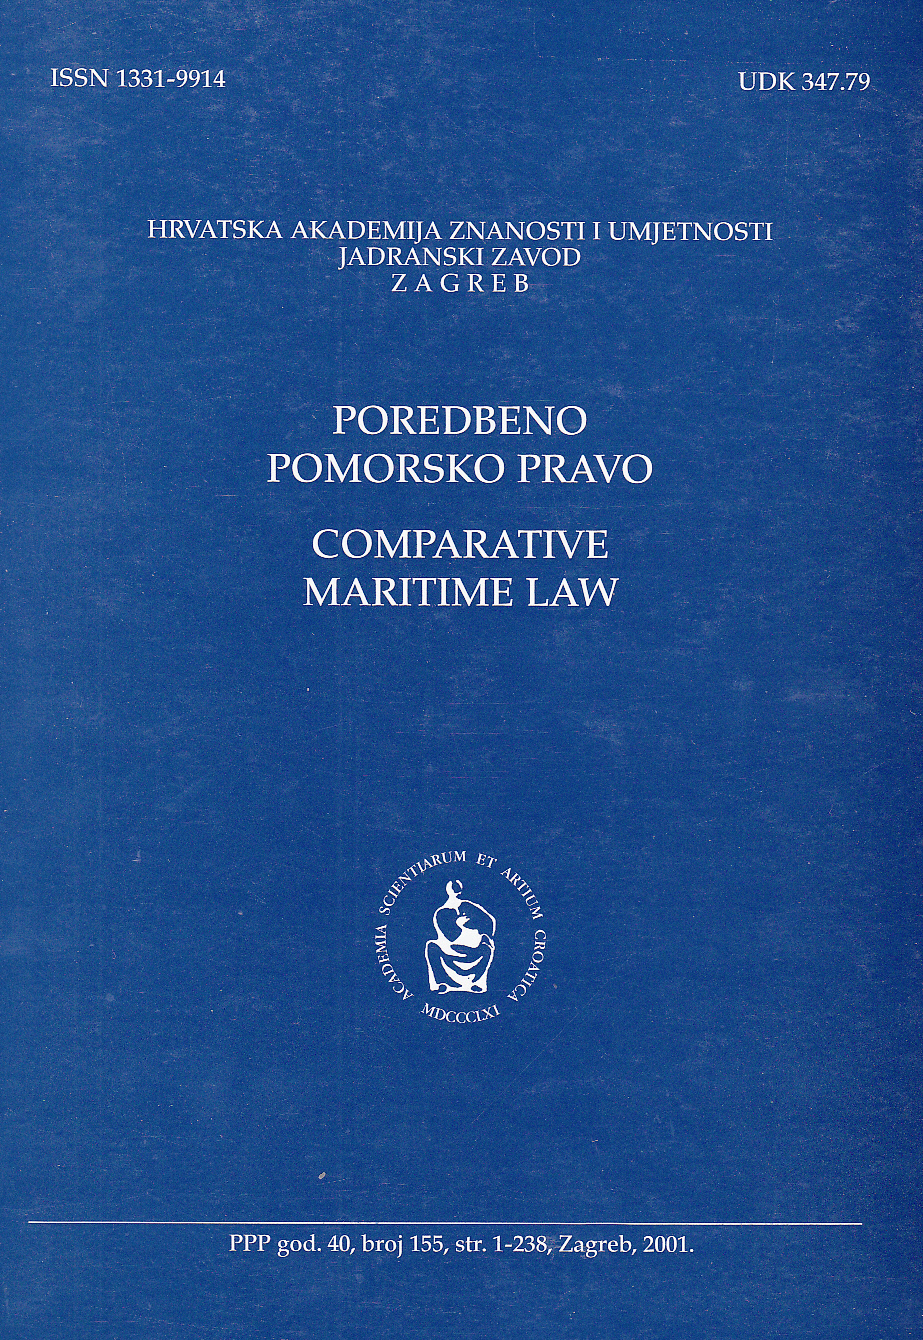 Piercing the corporative veil in maritime law Cover Image